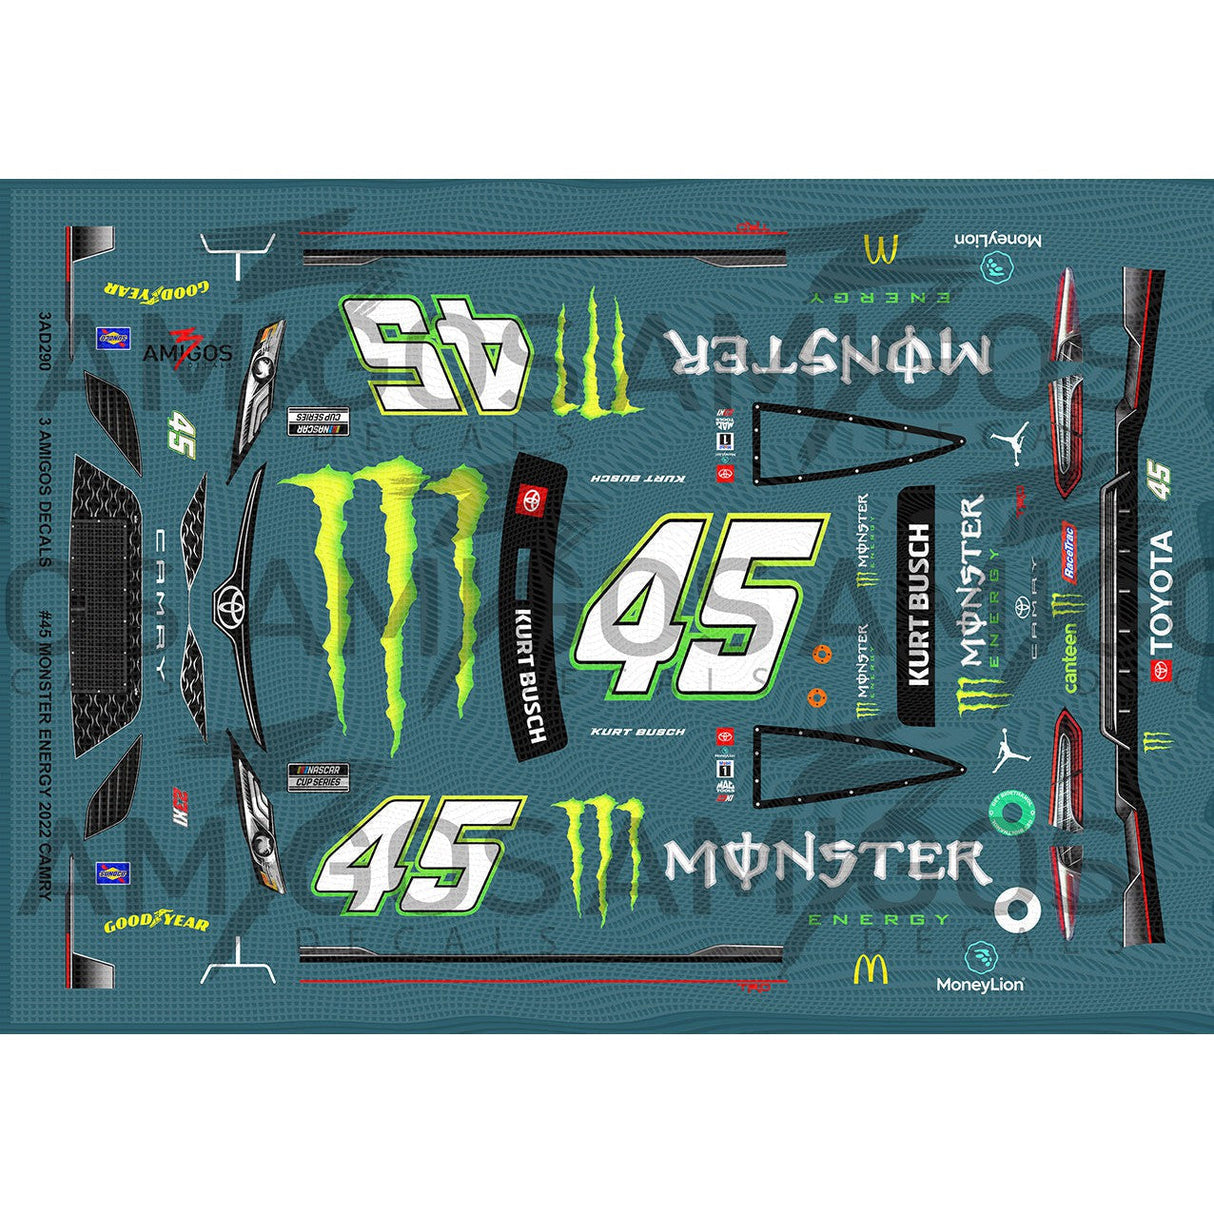 3 Amigos Decals #45 MONSTER ENERGY 2022 CAMRY Decal Set 1:24